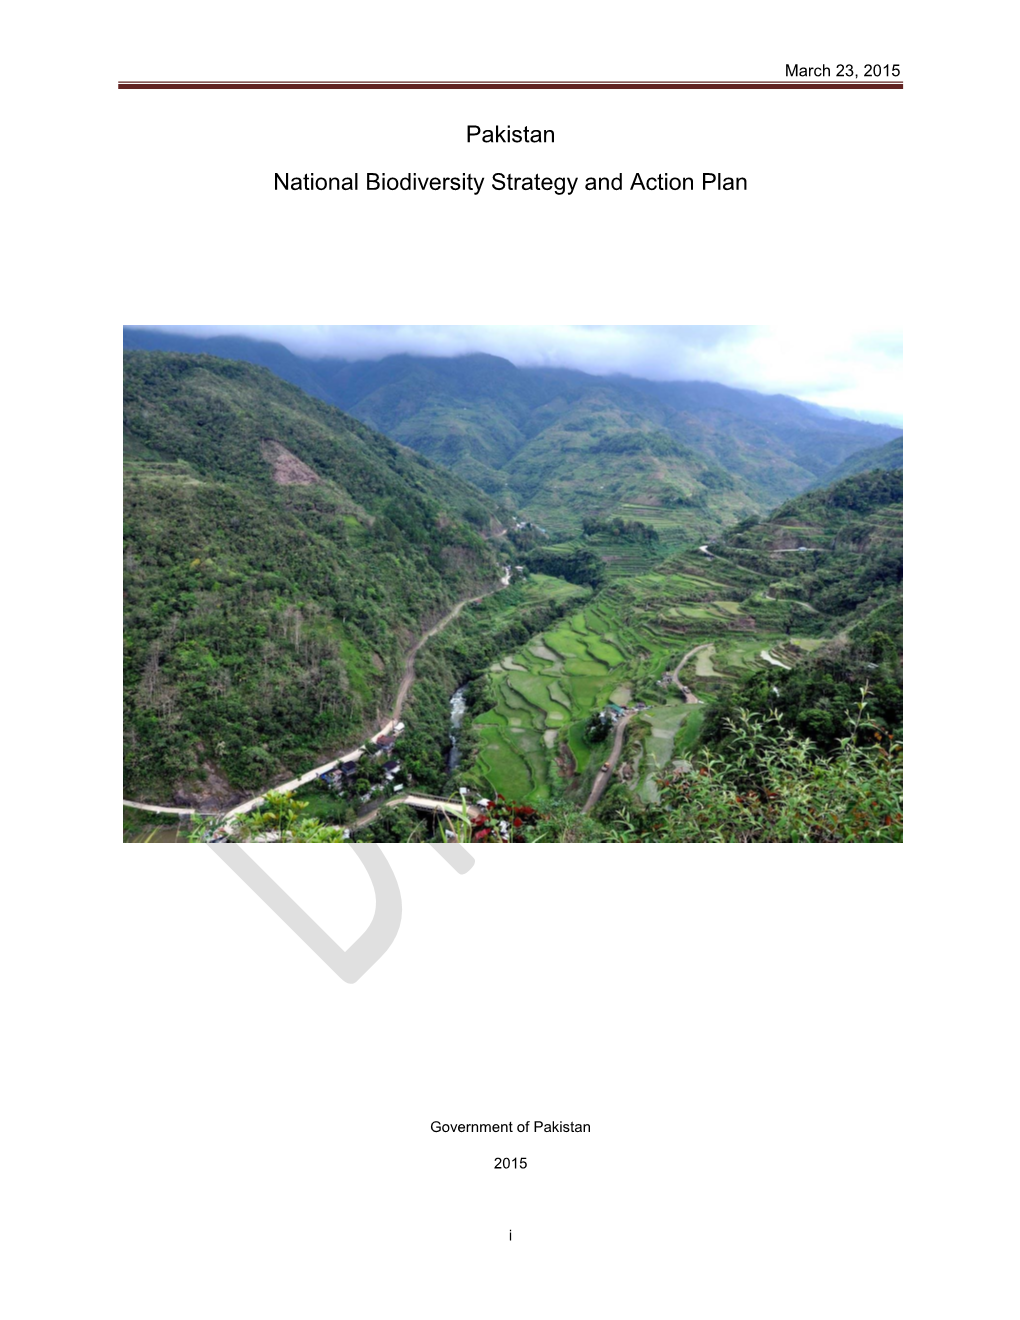 Pakistan National Biodiversity Strategy and Action Plan